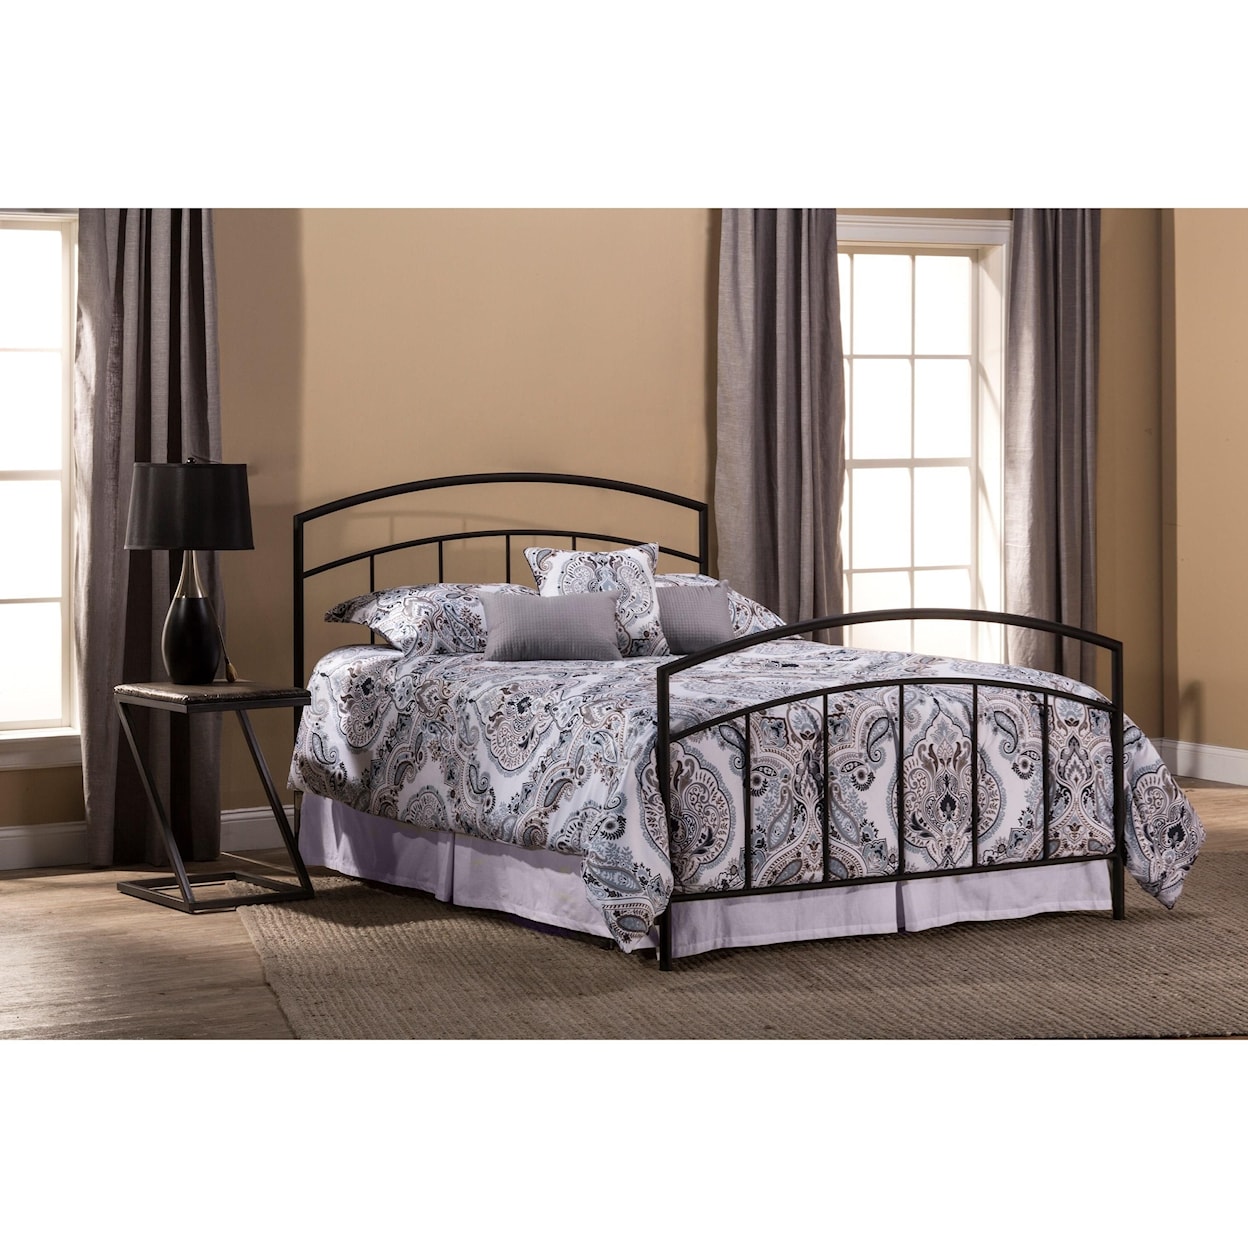 Hillsdale   Queen Bed Set with Rails